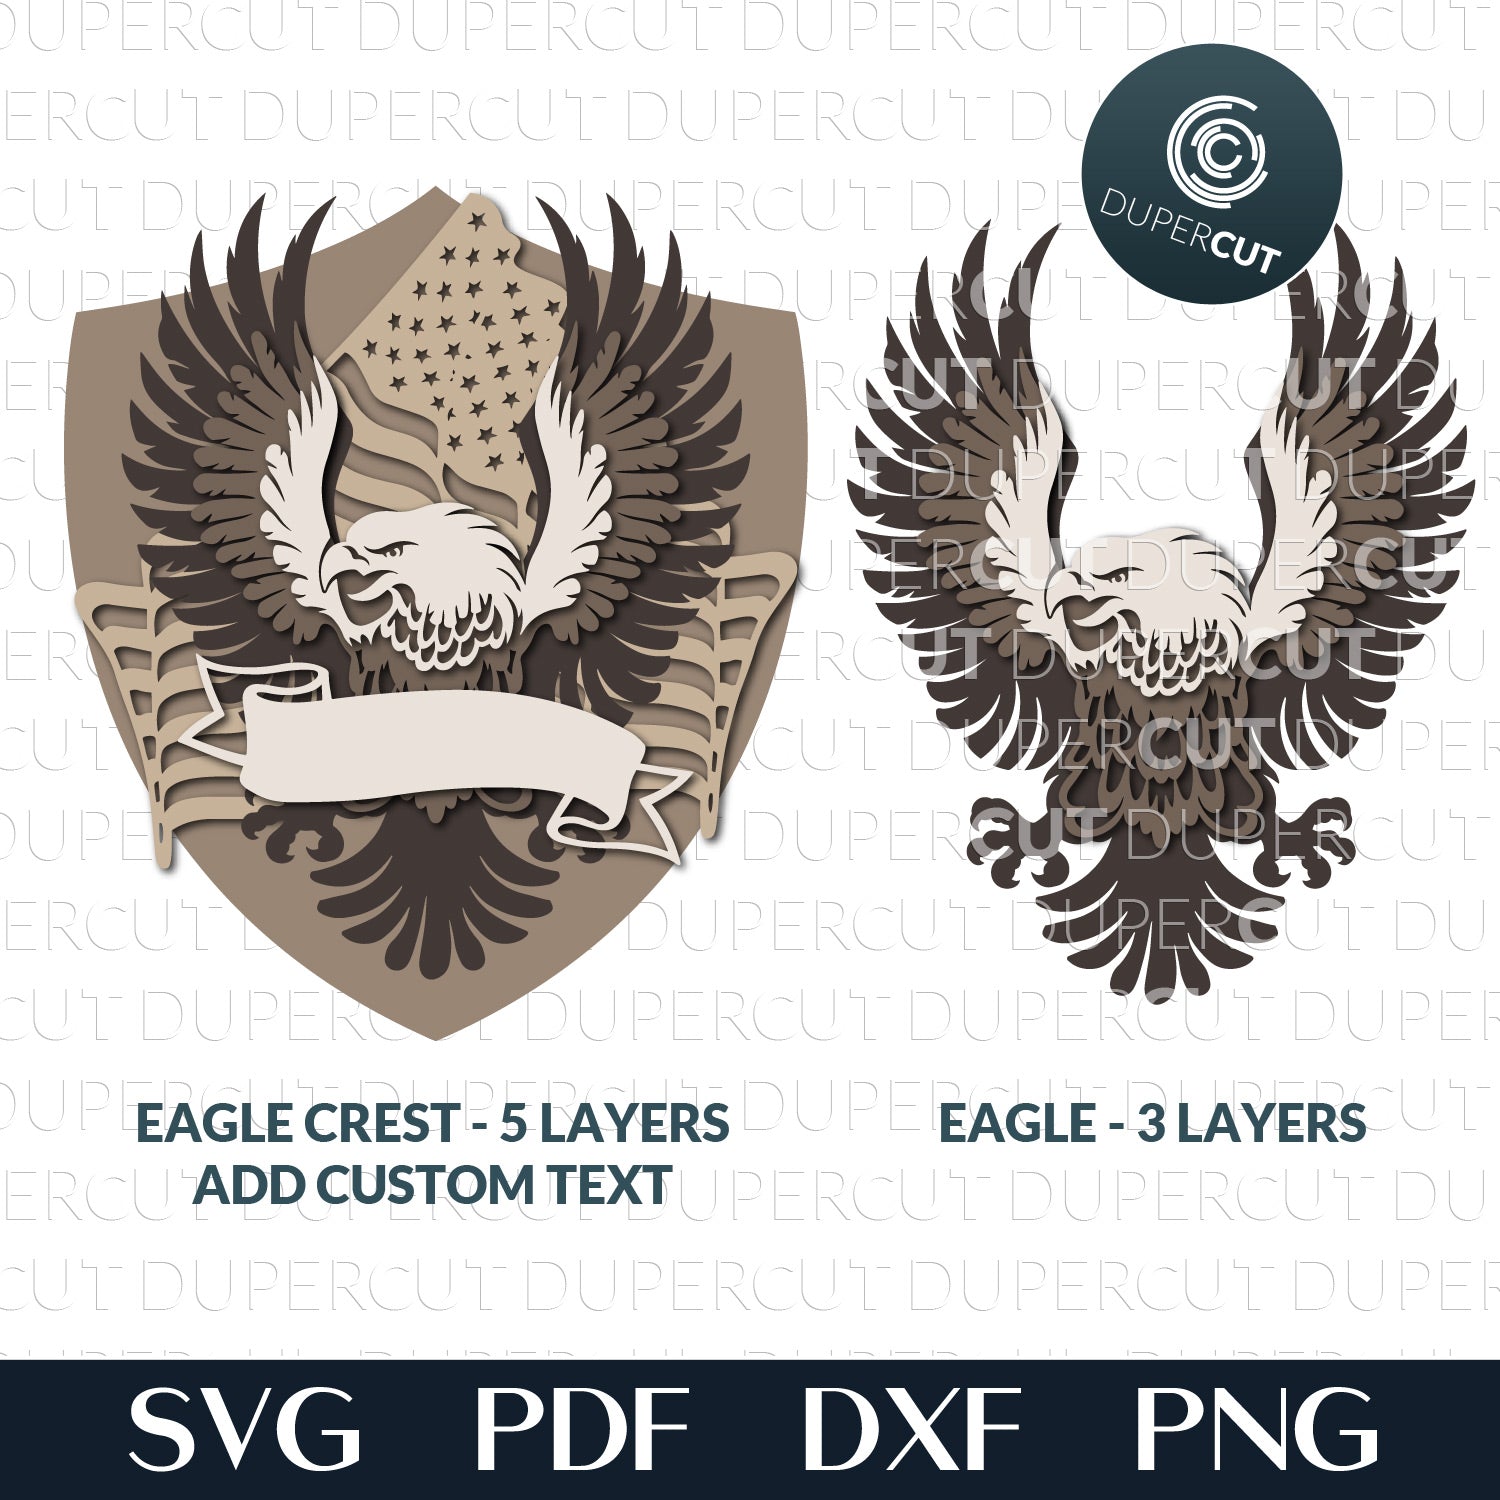 USA flag patriotic eagle "land of the free" pattern  - SVG DXF layered vector cutting files for Glowforge, Cricut, Silhouette Cameo, CNC plasma machines by DuperCut.com